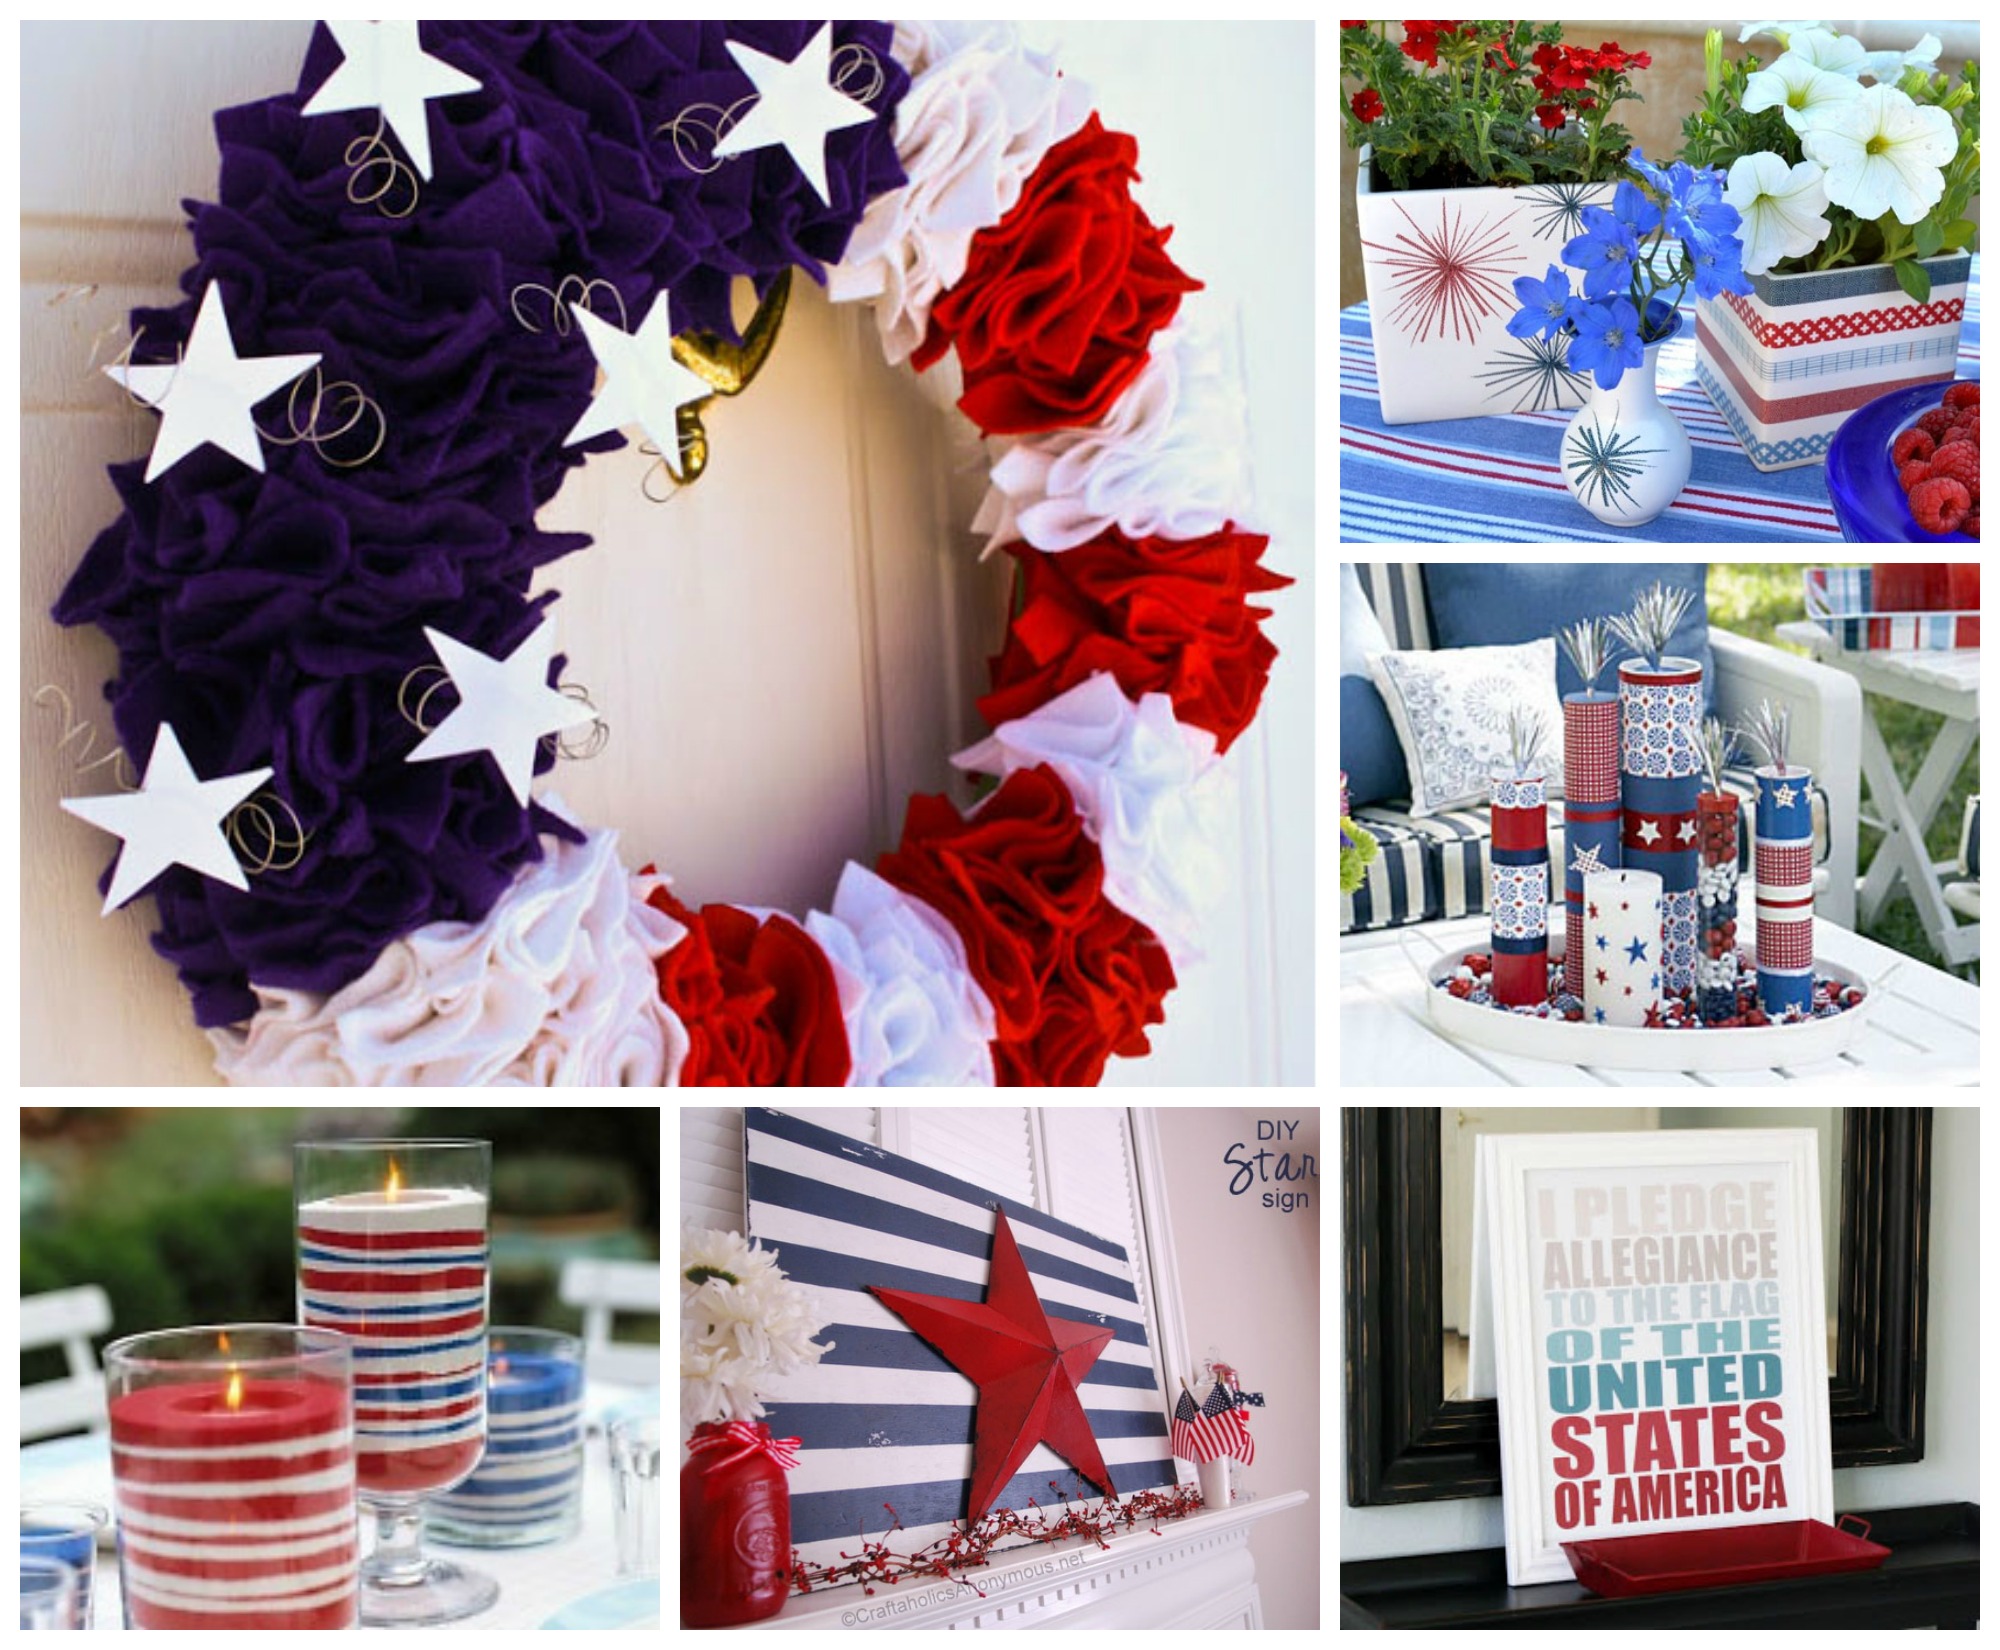 Decorating for July 4th